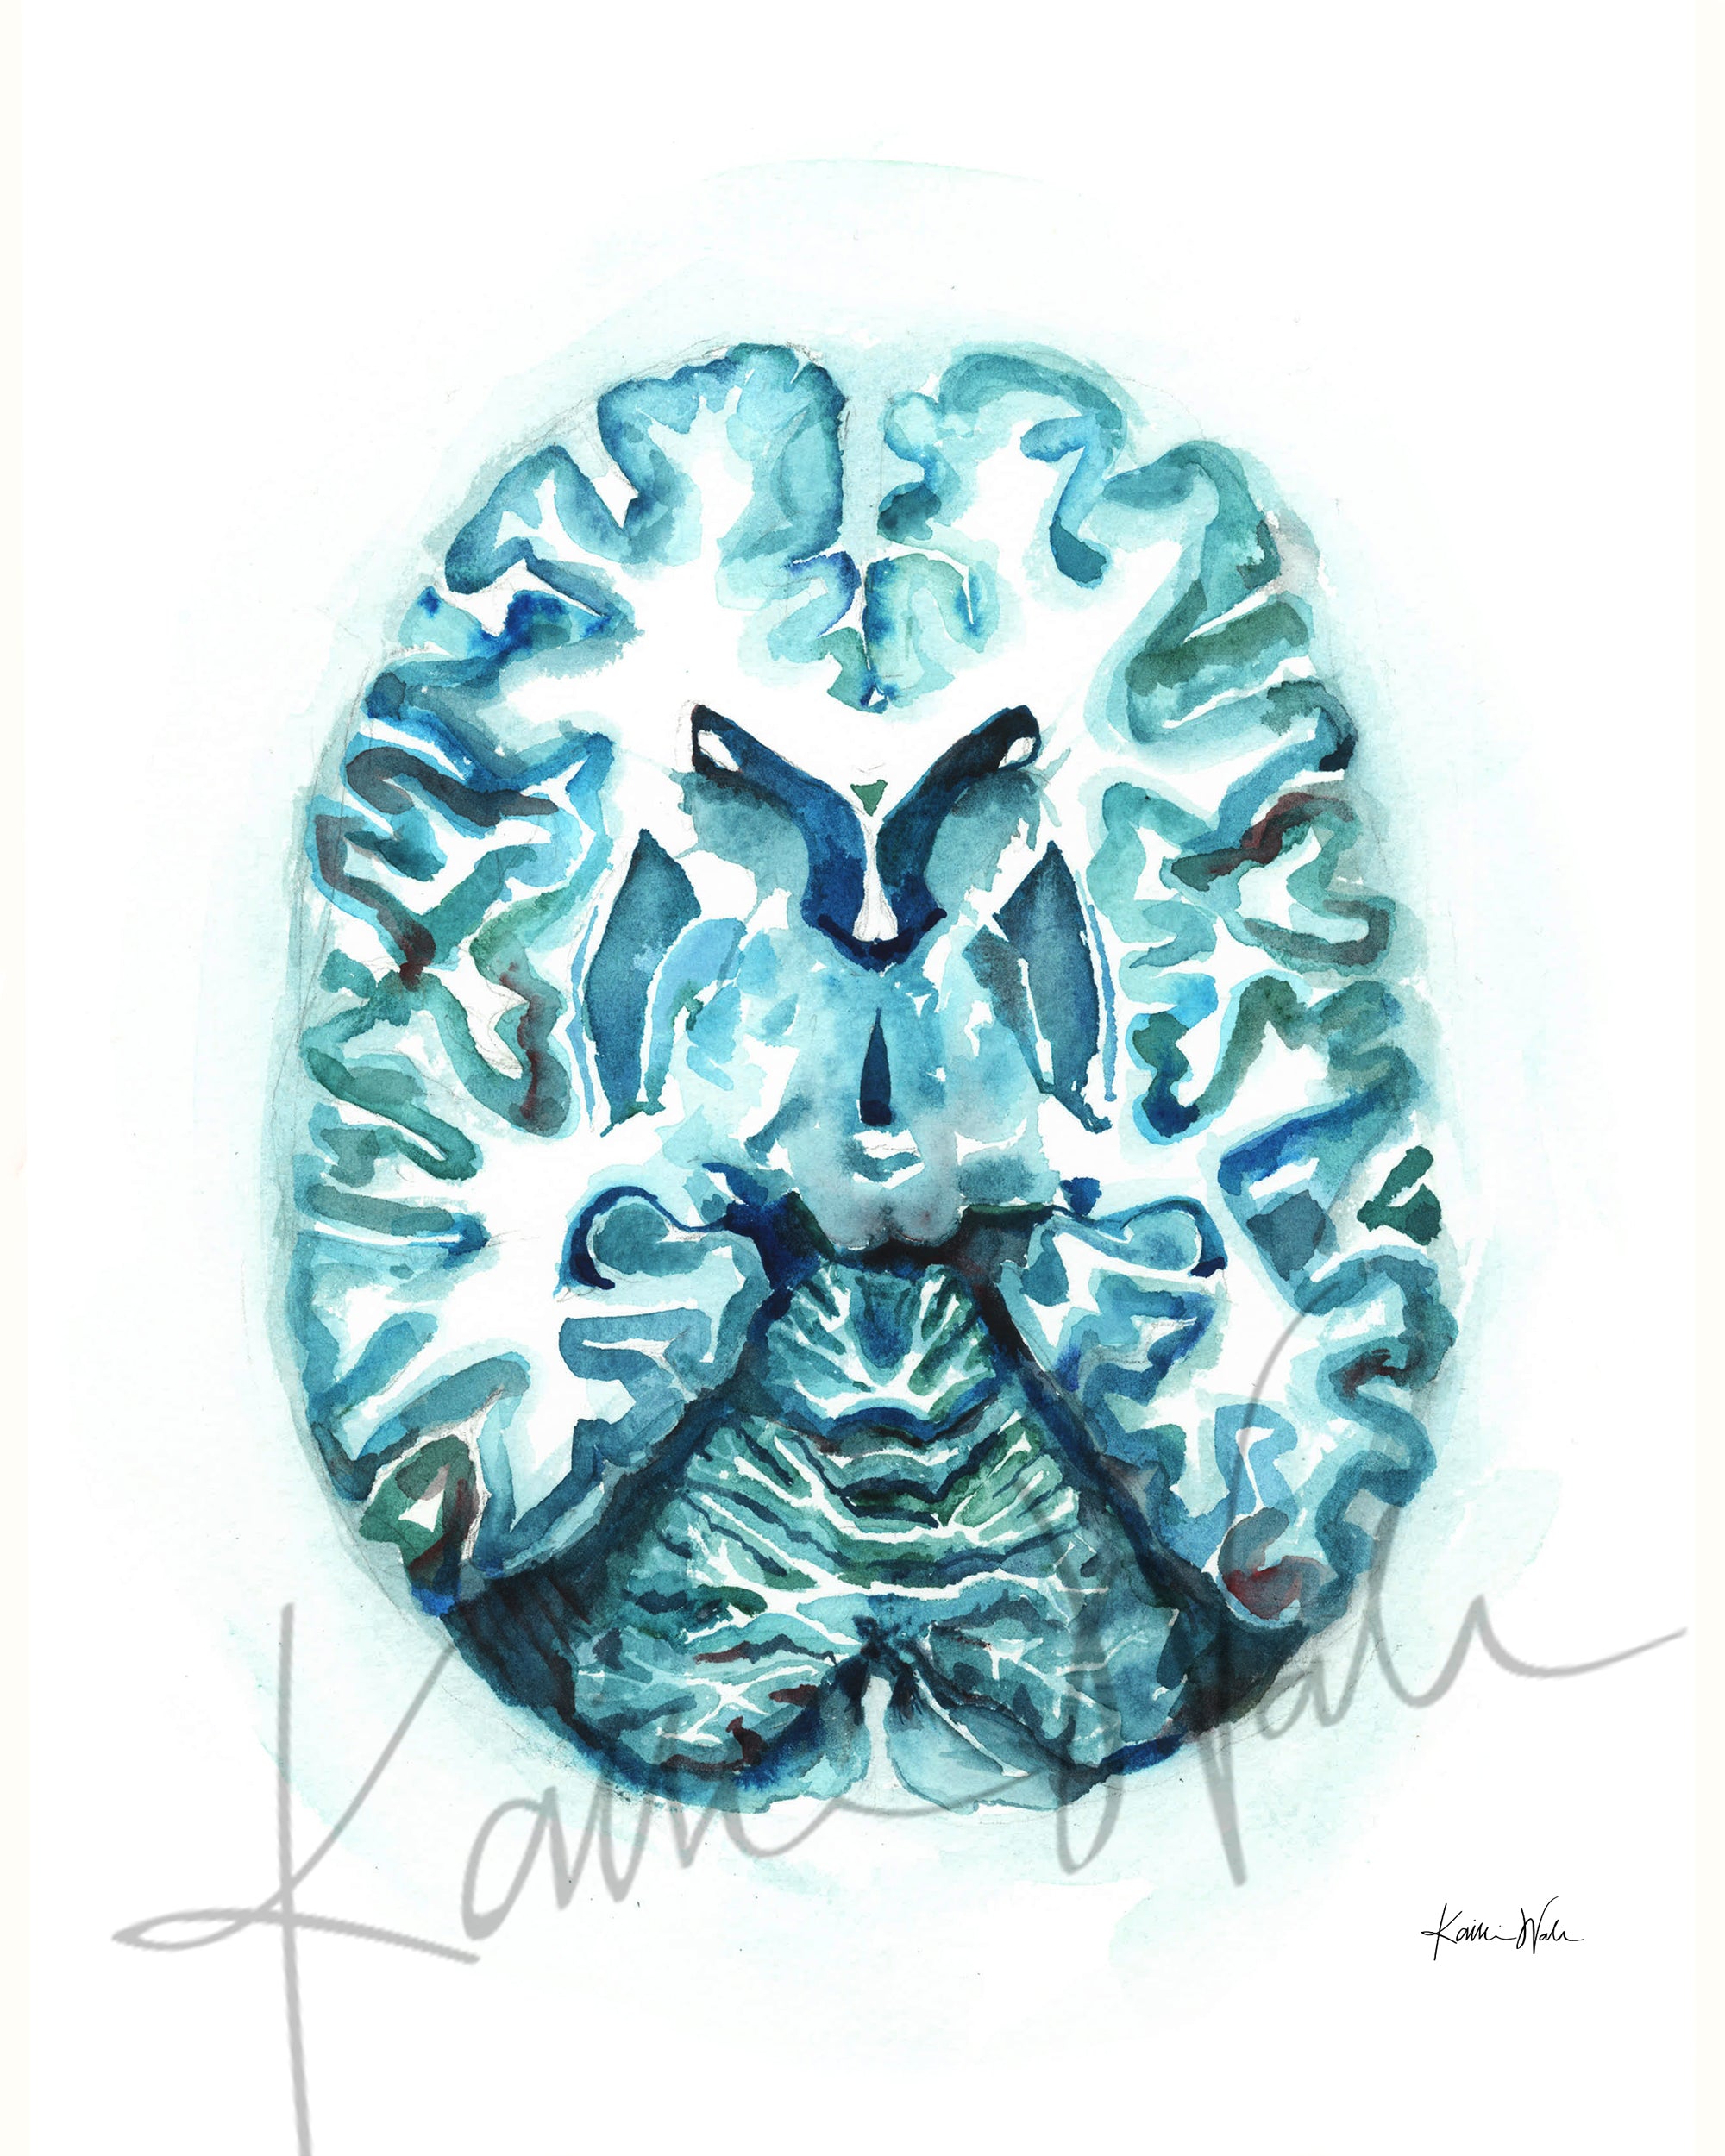 Unframed watercolor painting showing a teal and blue transverse cut of the brain.